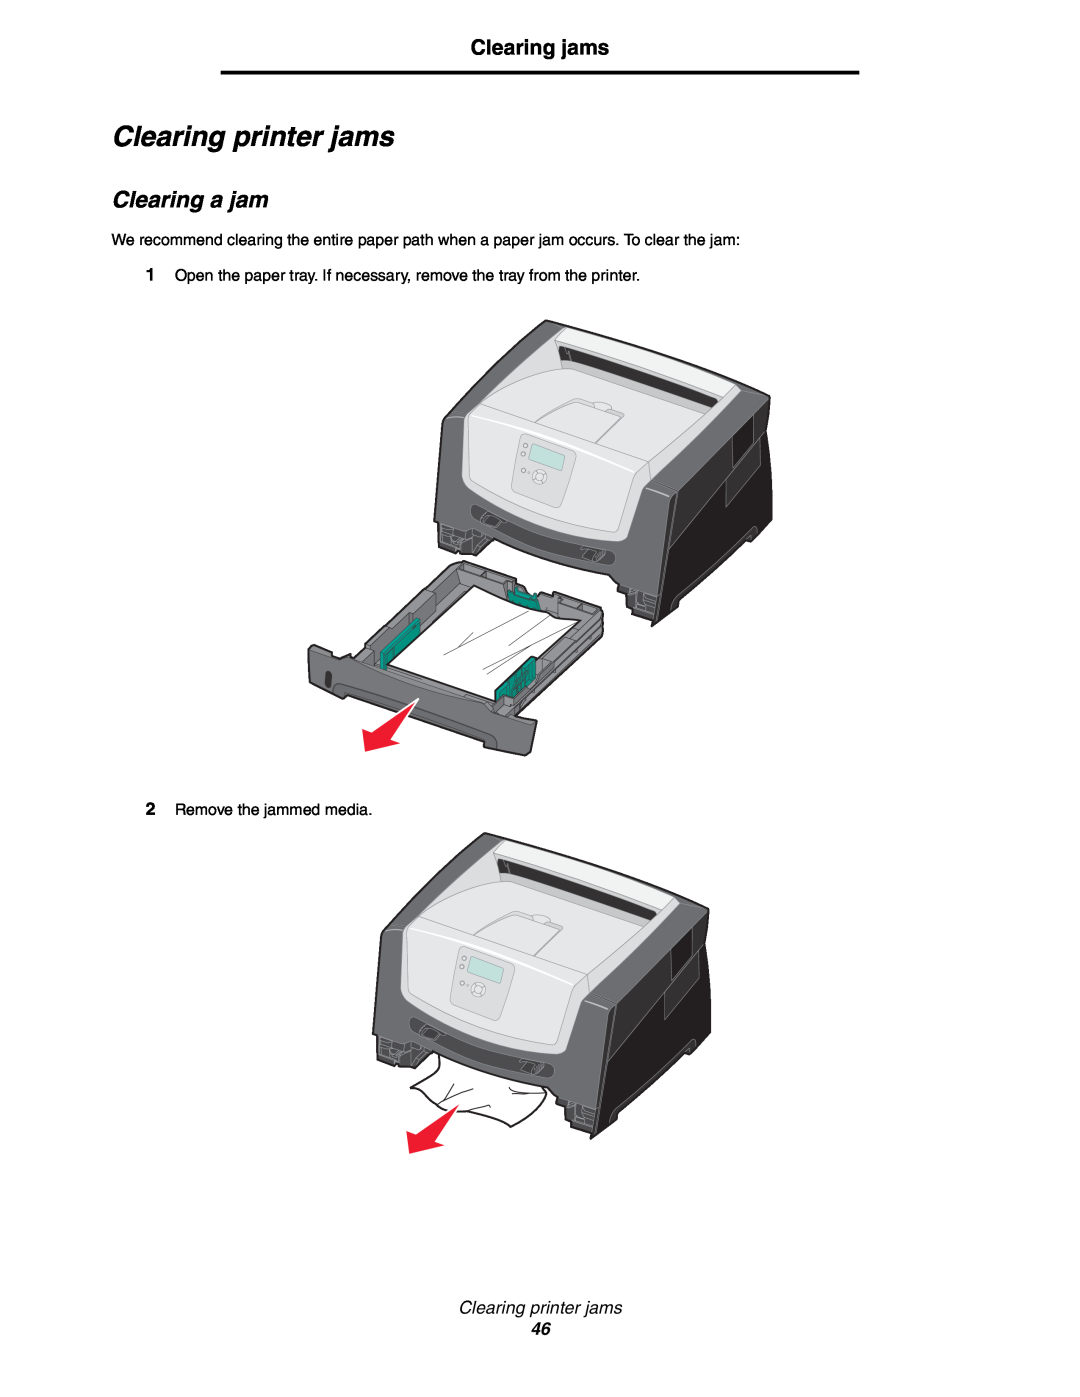 Lexmark 450dn manual Clearing printer jams, Clearing a jam, Clearing jams 